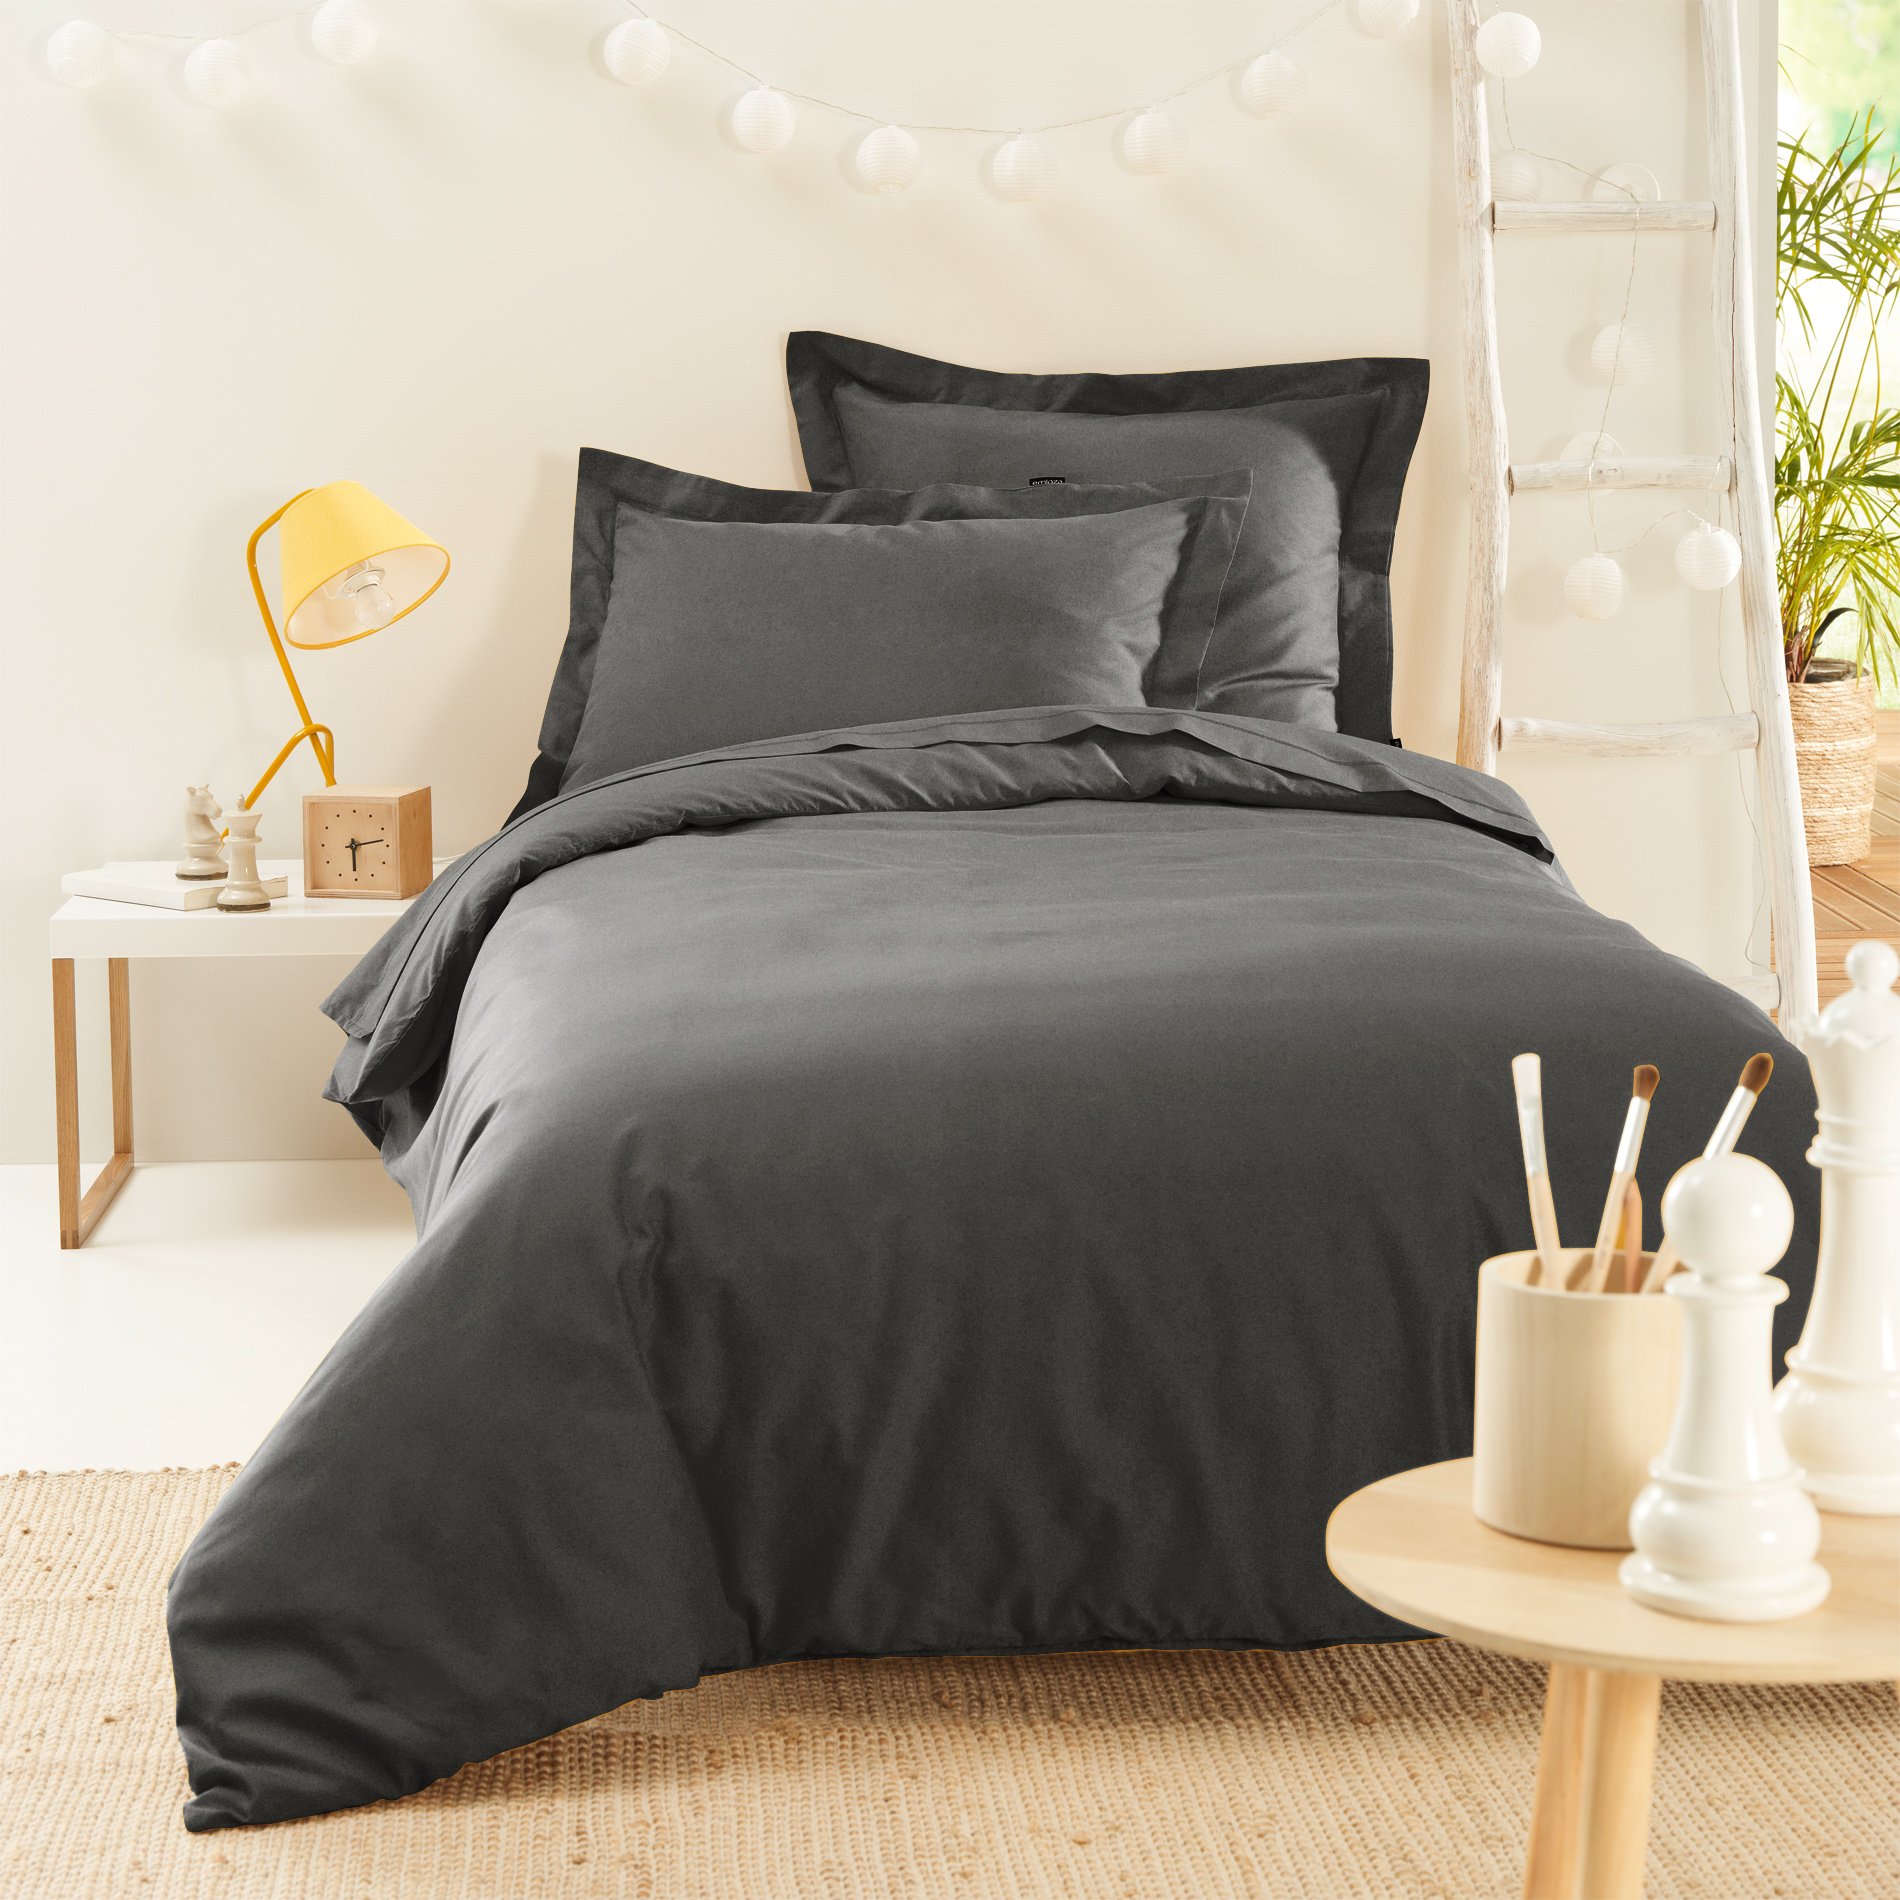 Housse de couette percale - Anthracite